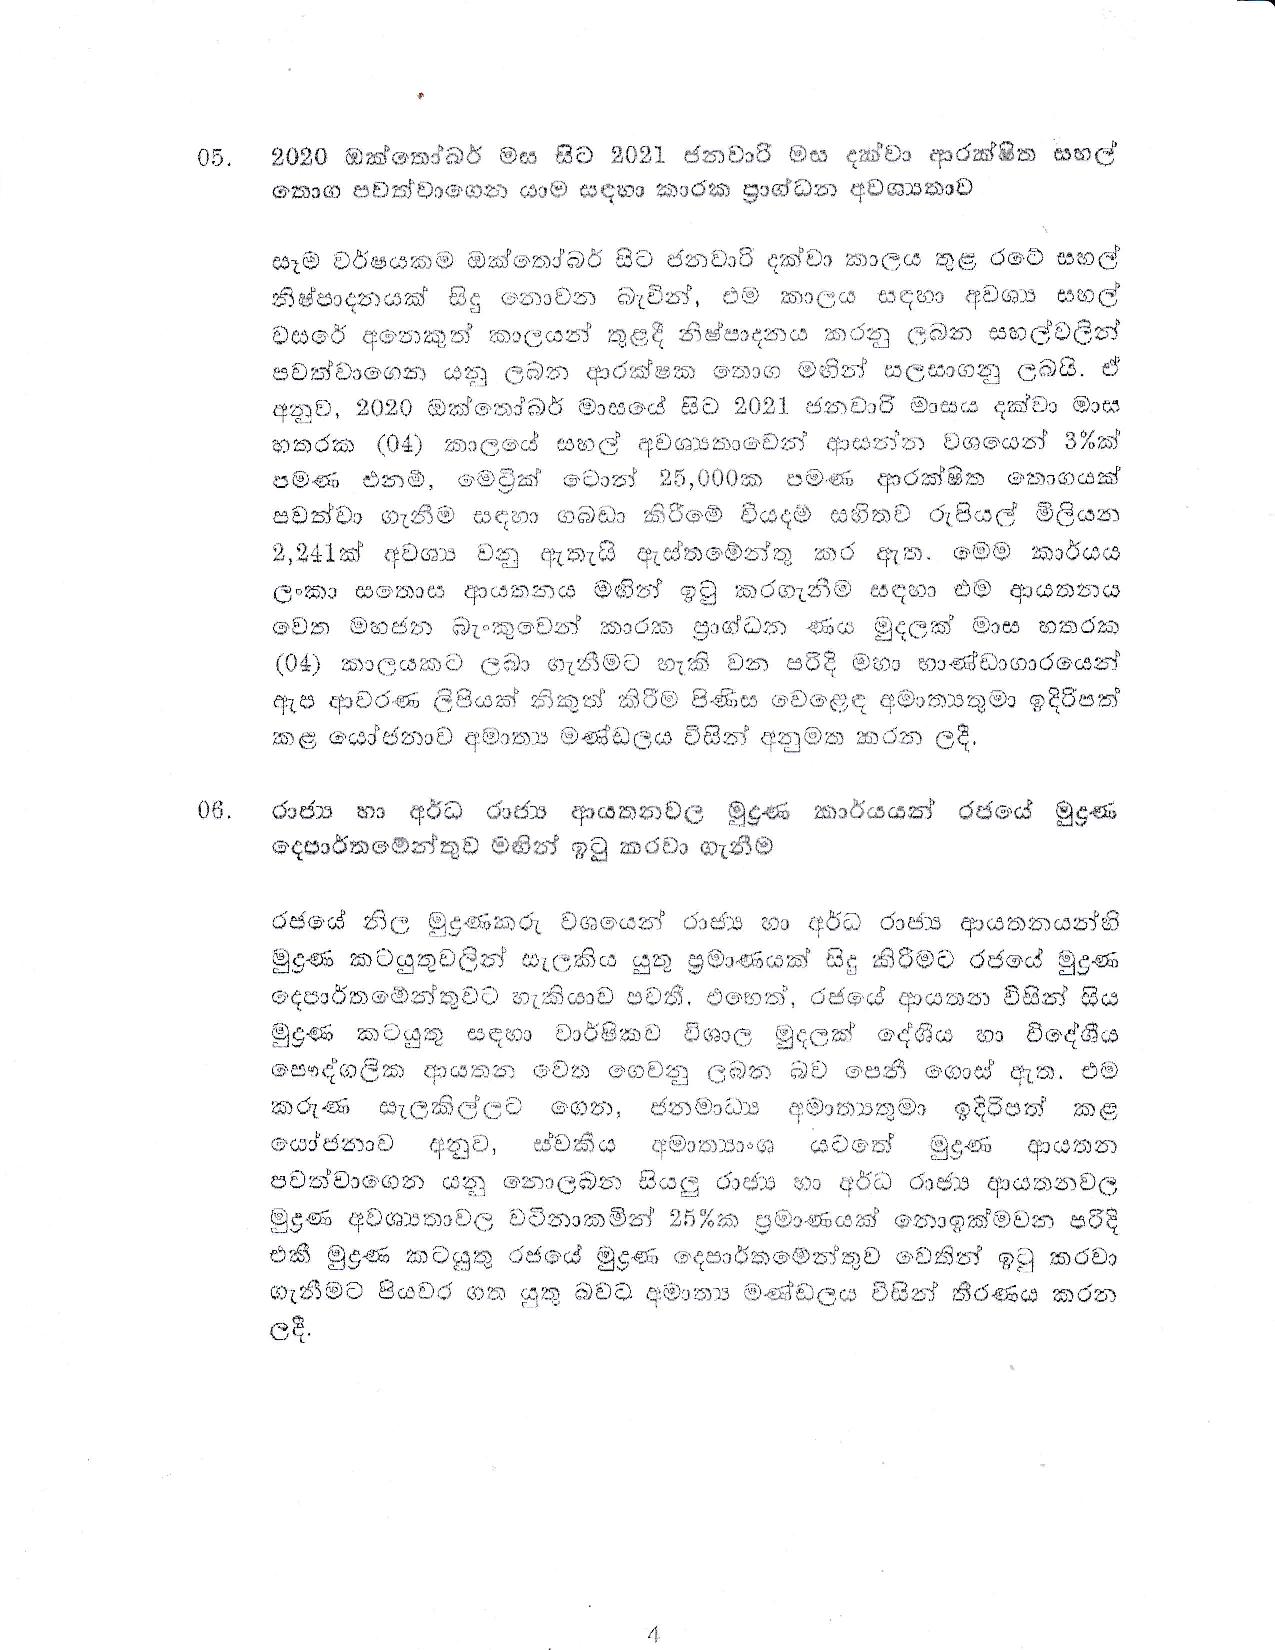 Cabinet Decision on 28.09.2020 page 004